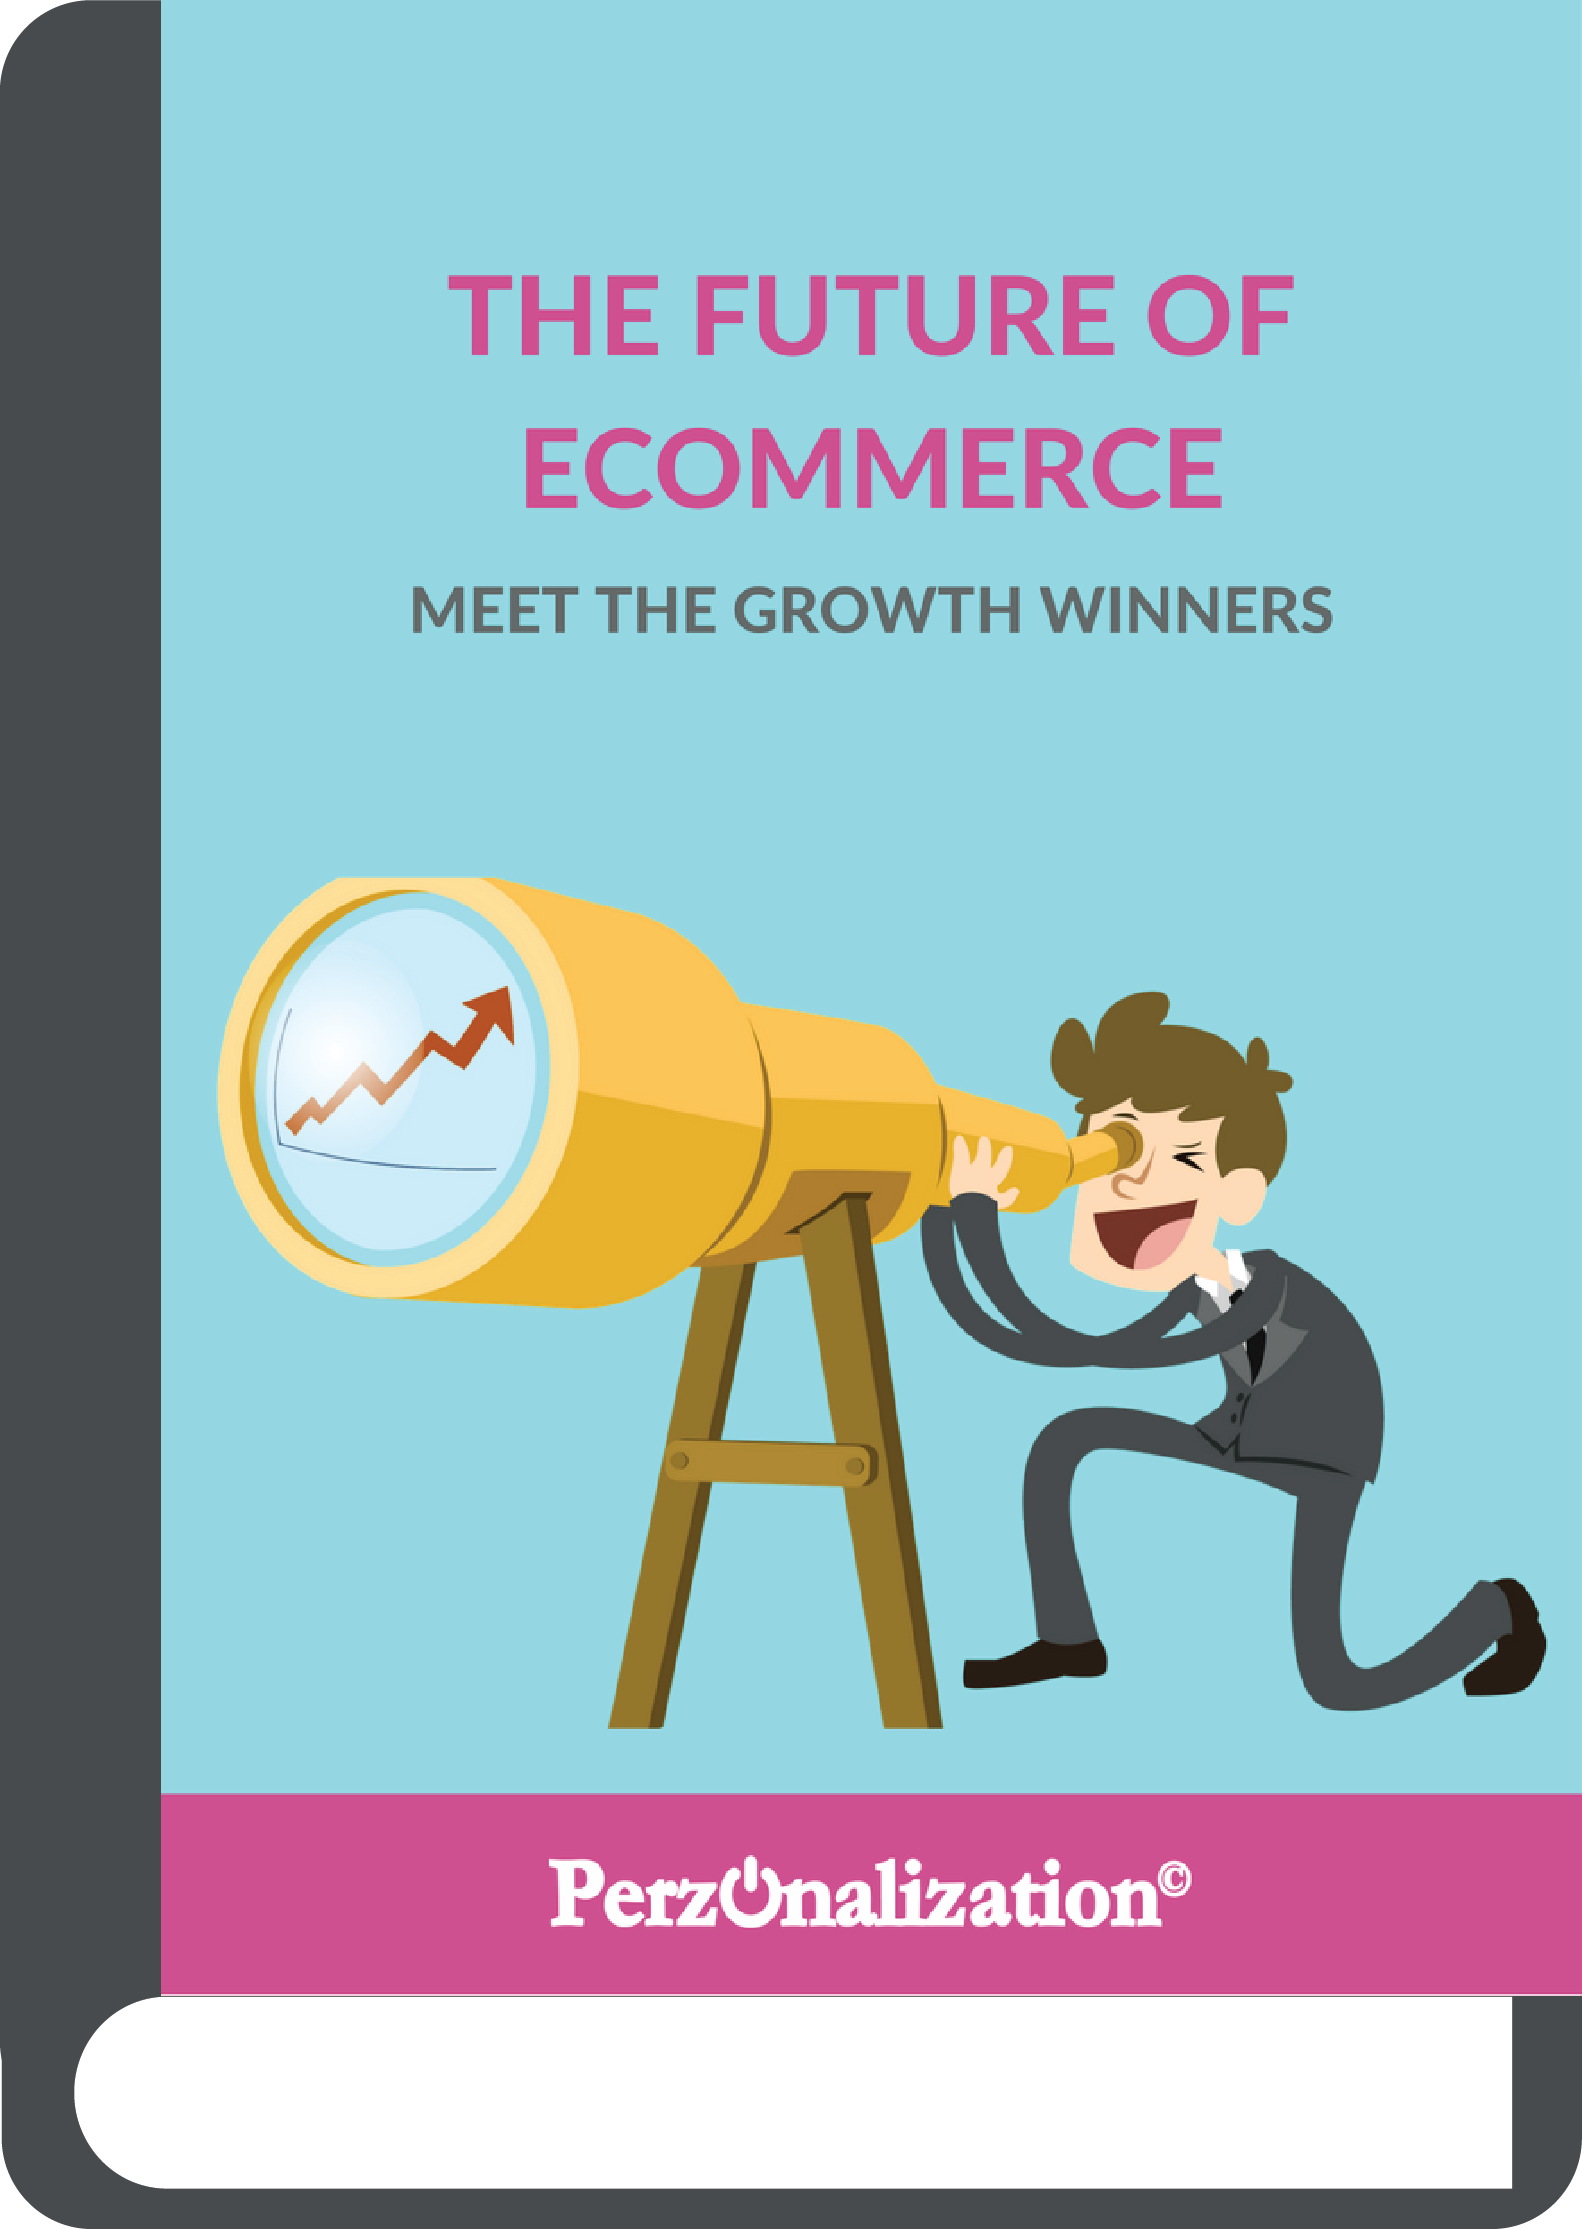 eCommerce is one of the most dynamic business models. Changes in social media and mobile drives radical changes in the consumer behaviour. In order to predict in which areas eCommerce will grow, we take a look at the high growth areas of today including categories and countries driving the growth.